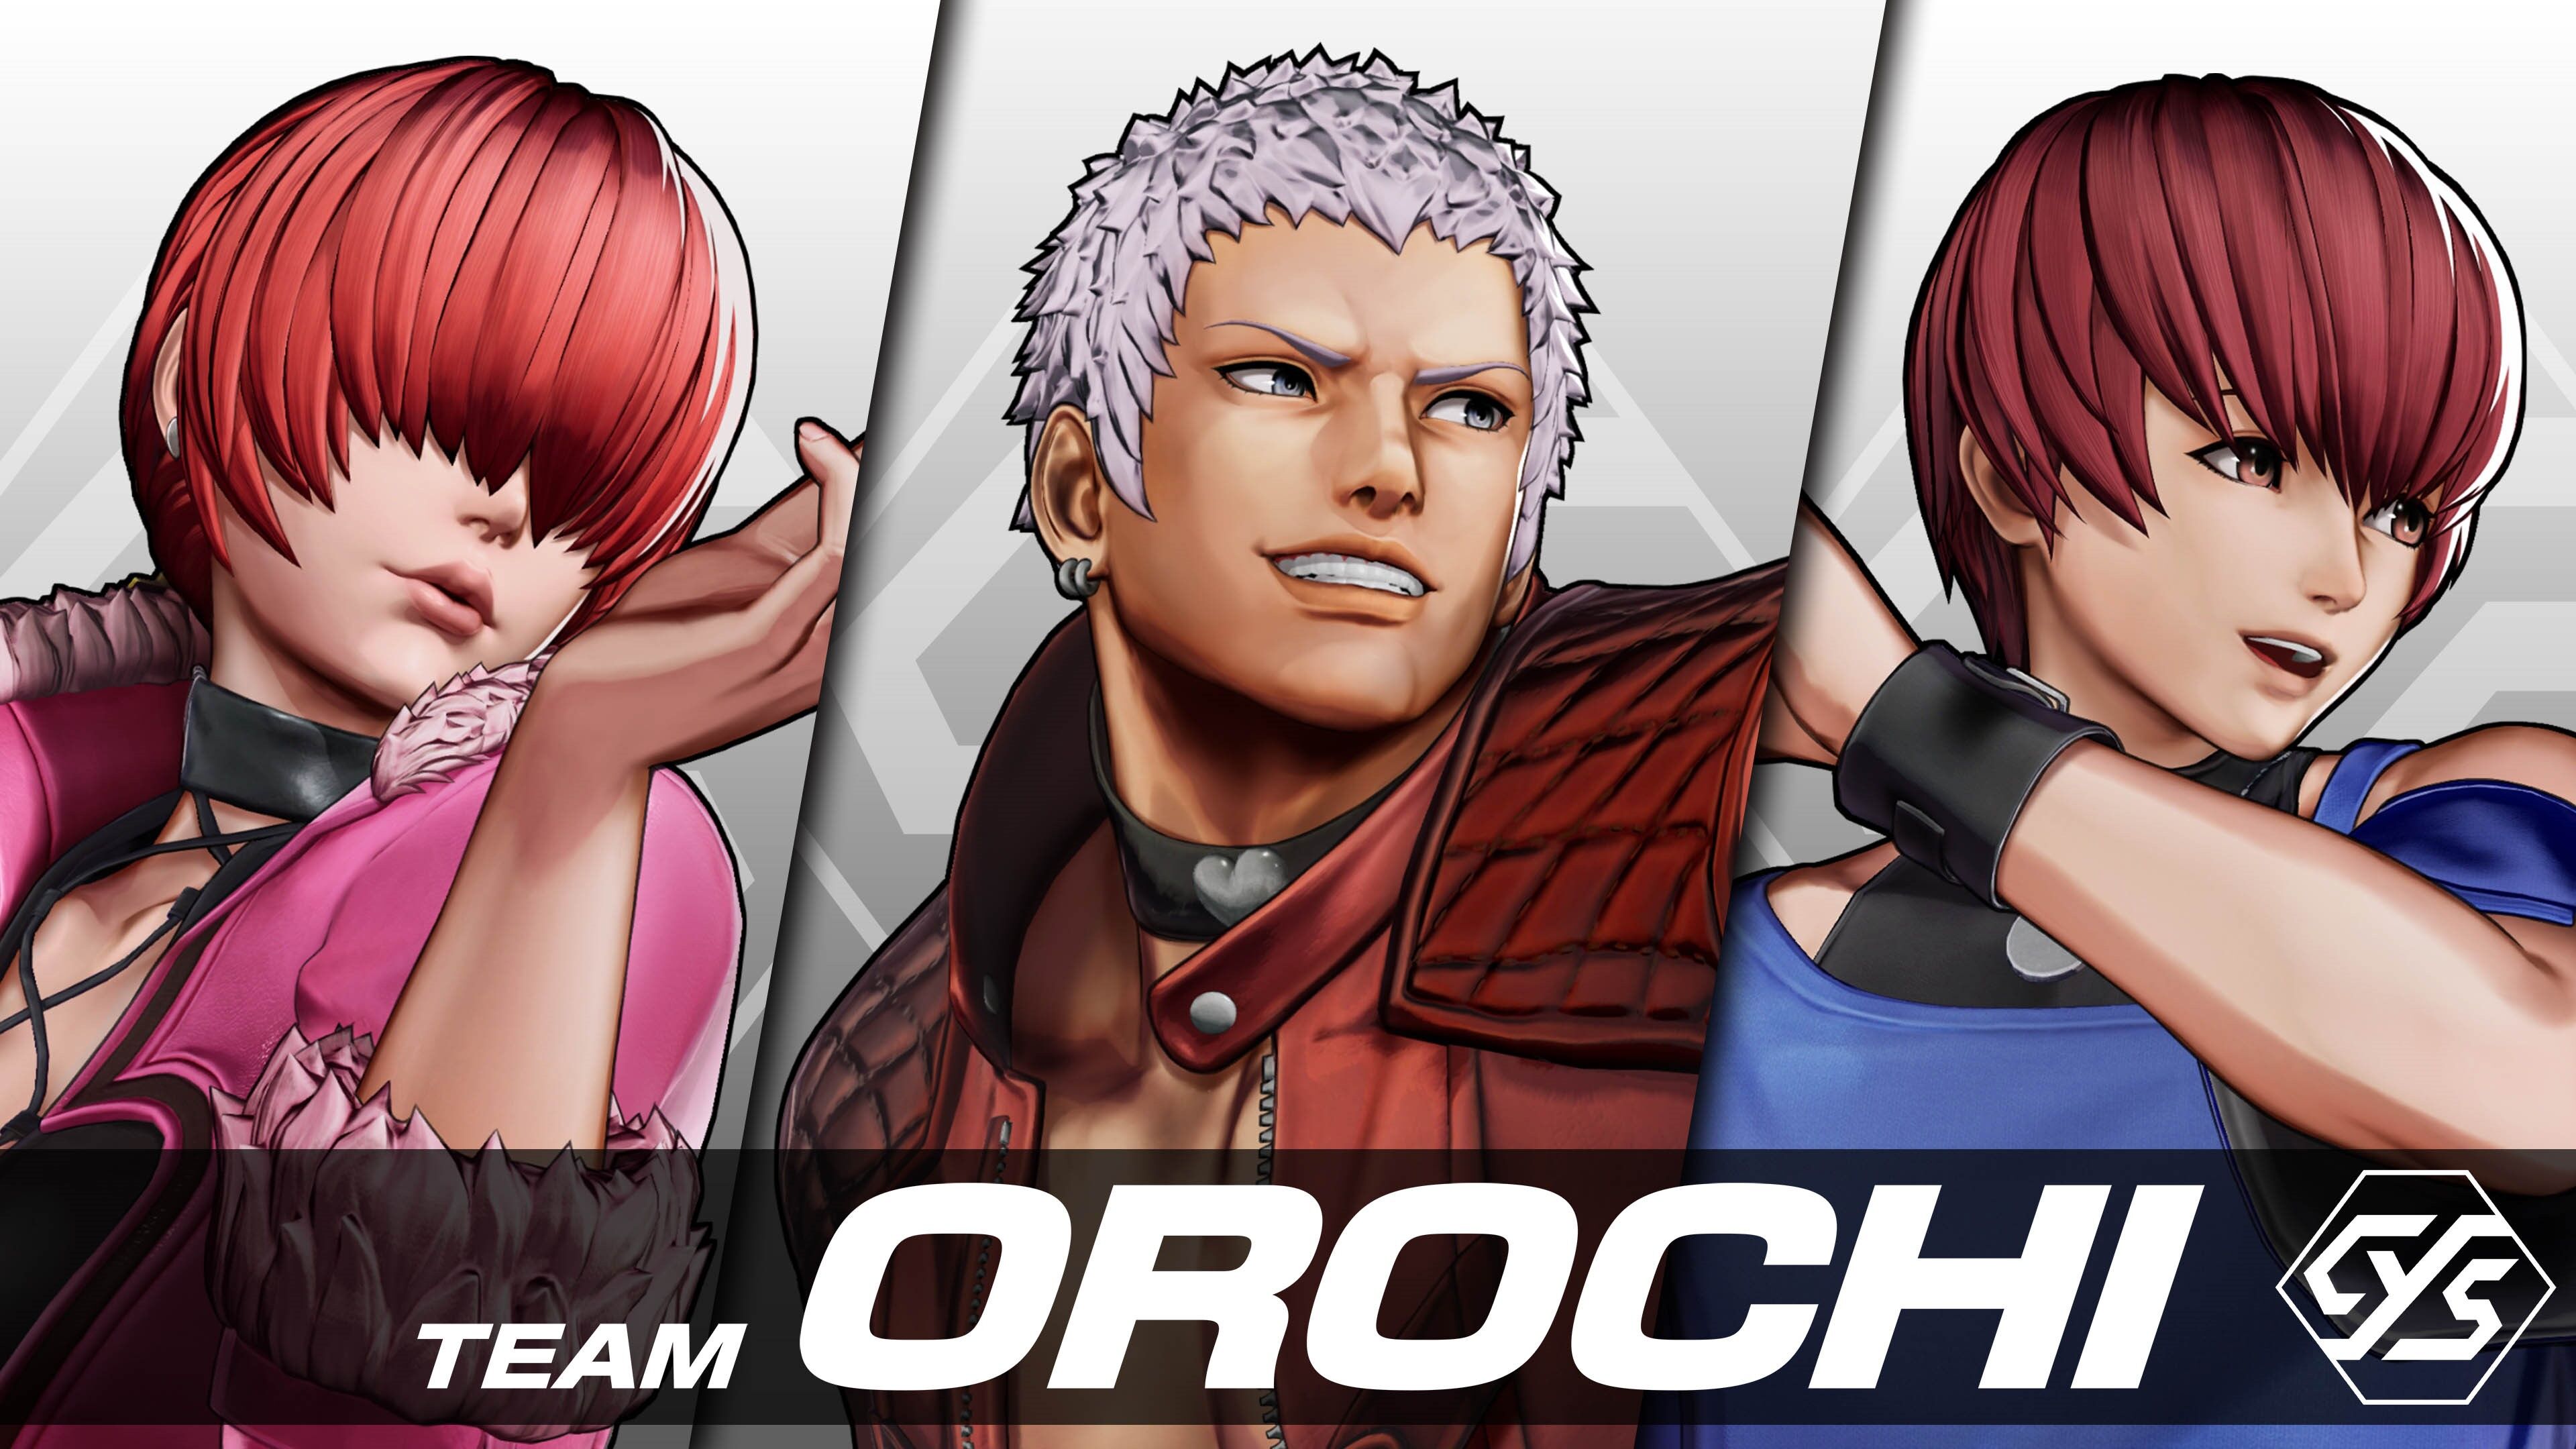 The King Of Fighters 2002: Unlimited Match Iori Yagami Leona Heidern Orochi  PNG - anime, black hair, brown hair, charac…